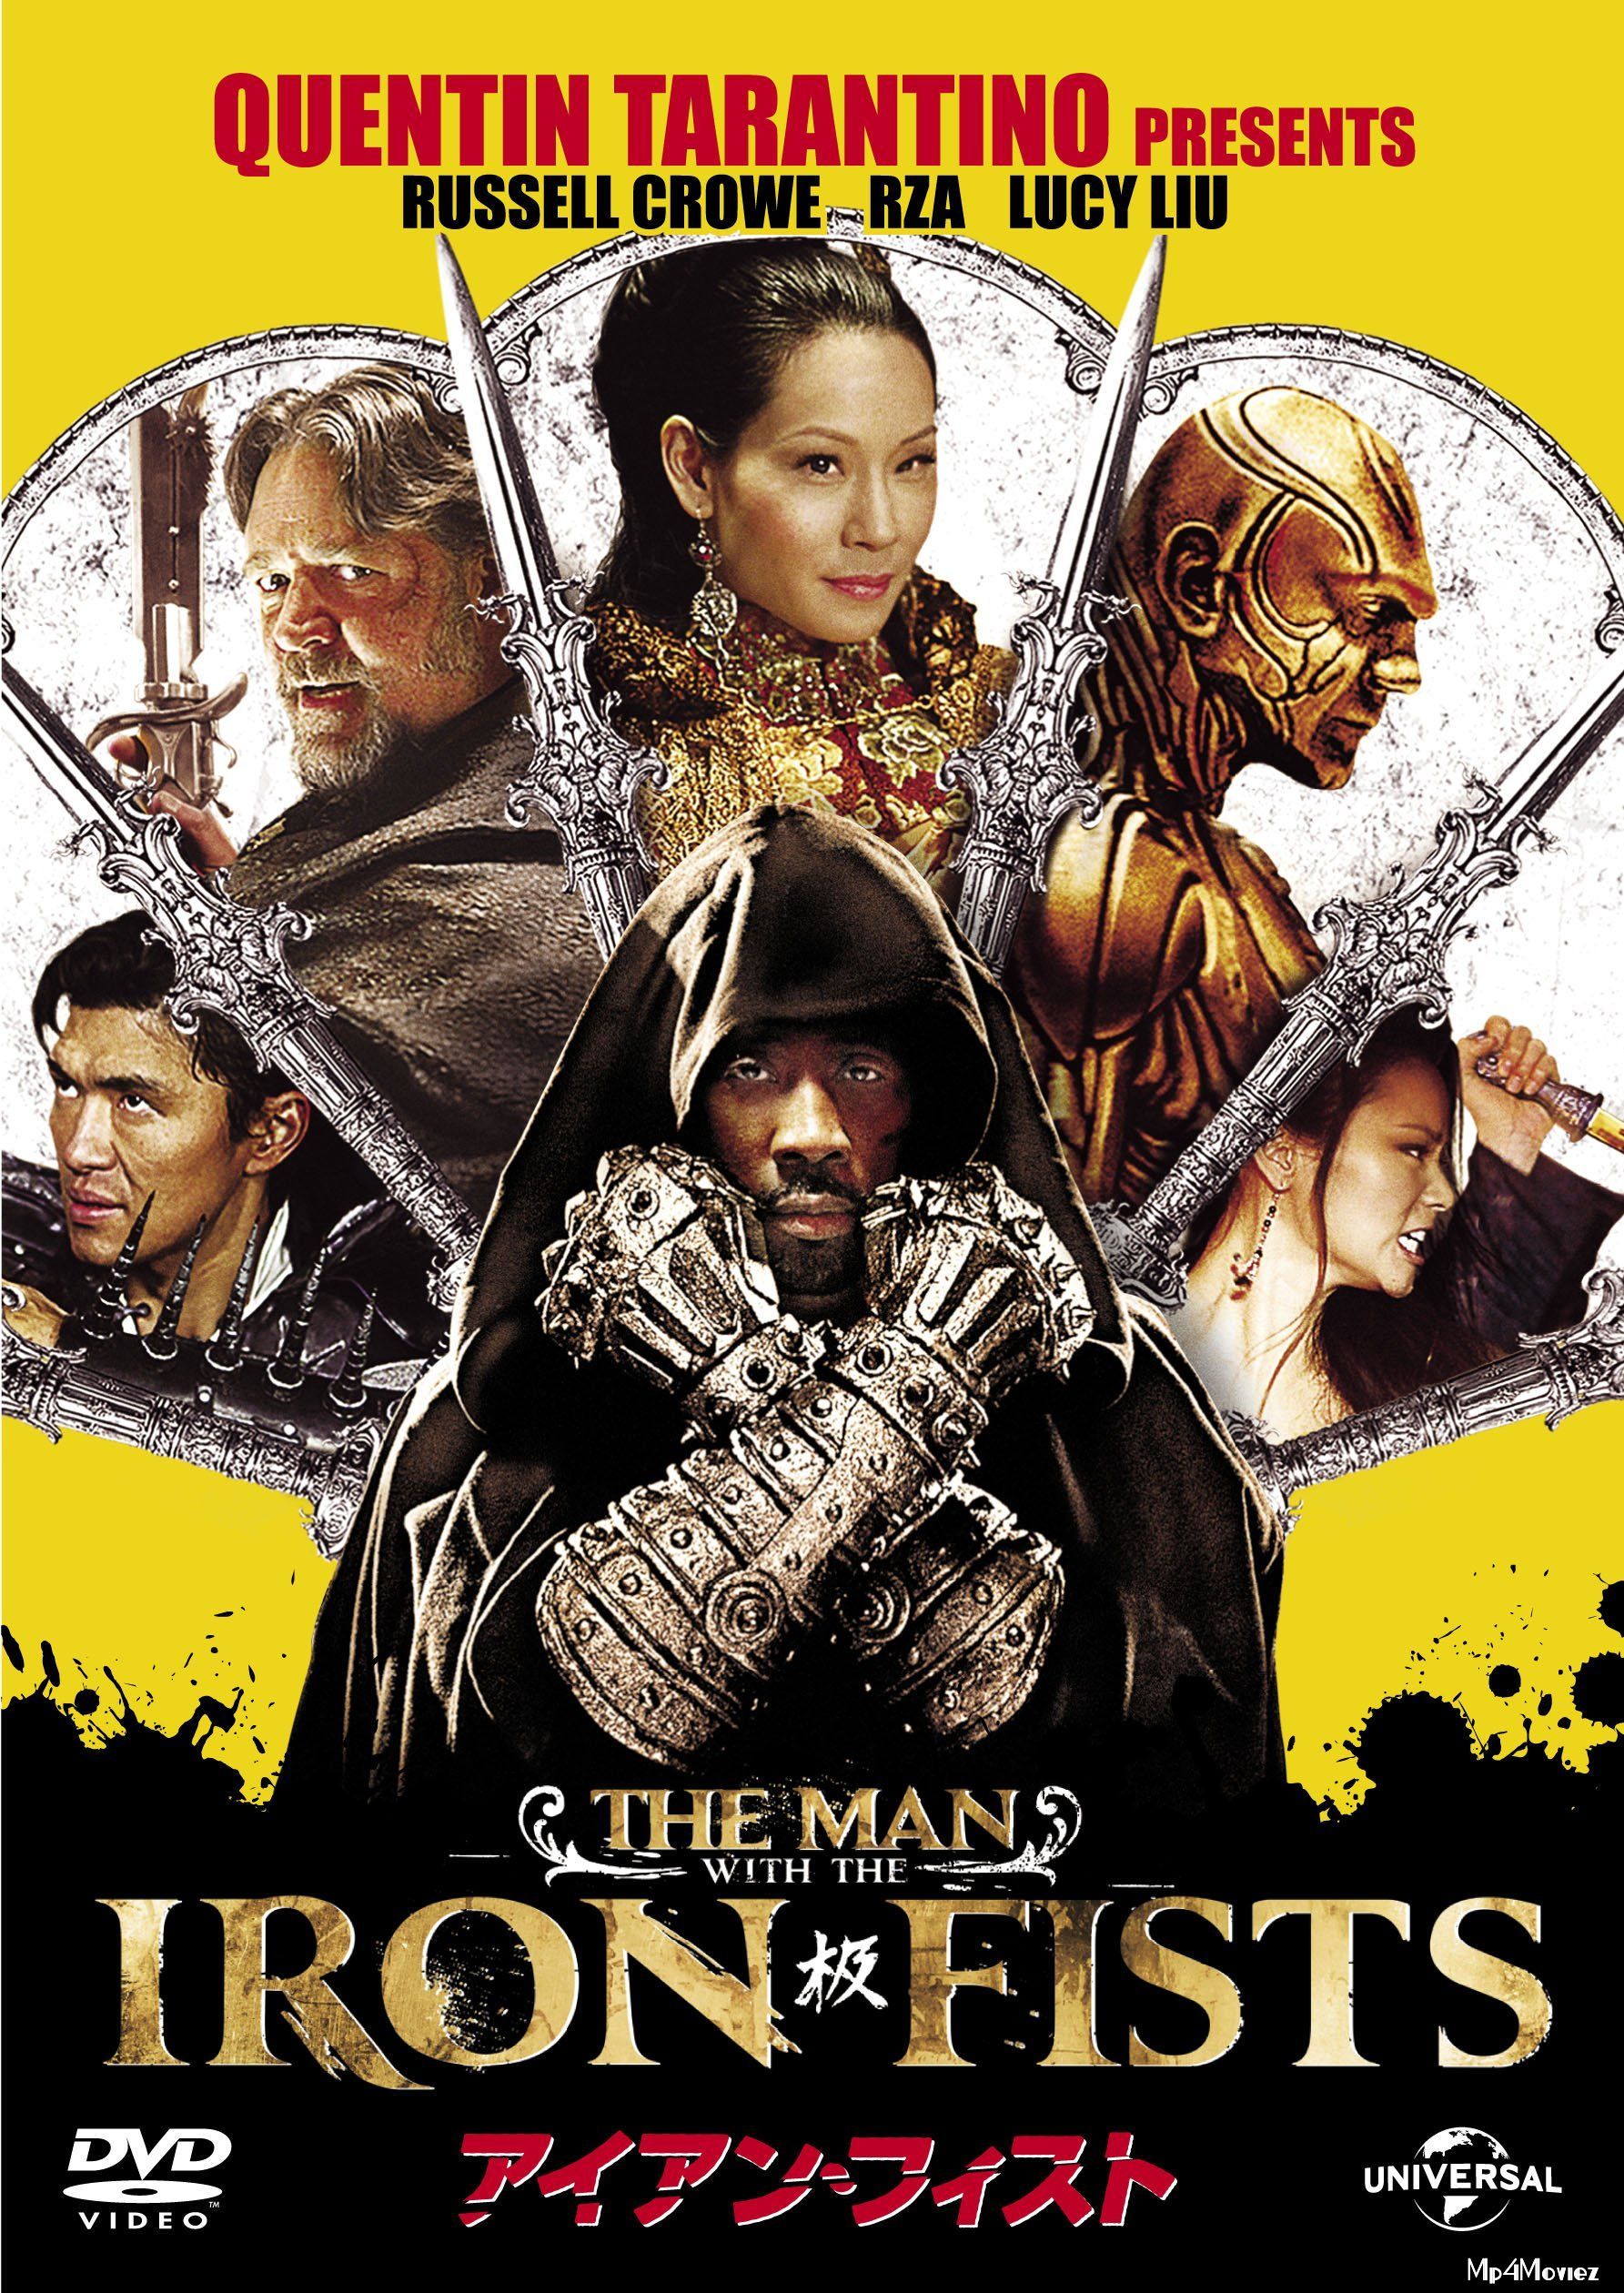 The Man with the Iron Fists 2012 Hindi Dubbed Full Movie download full movie